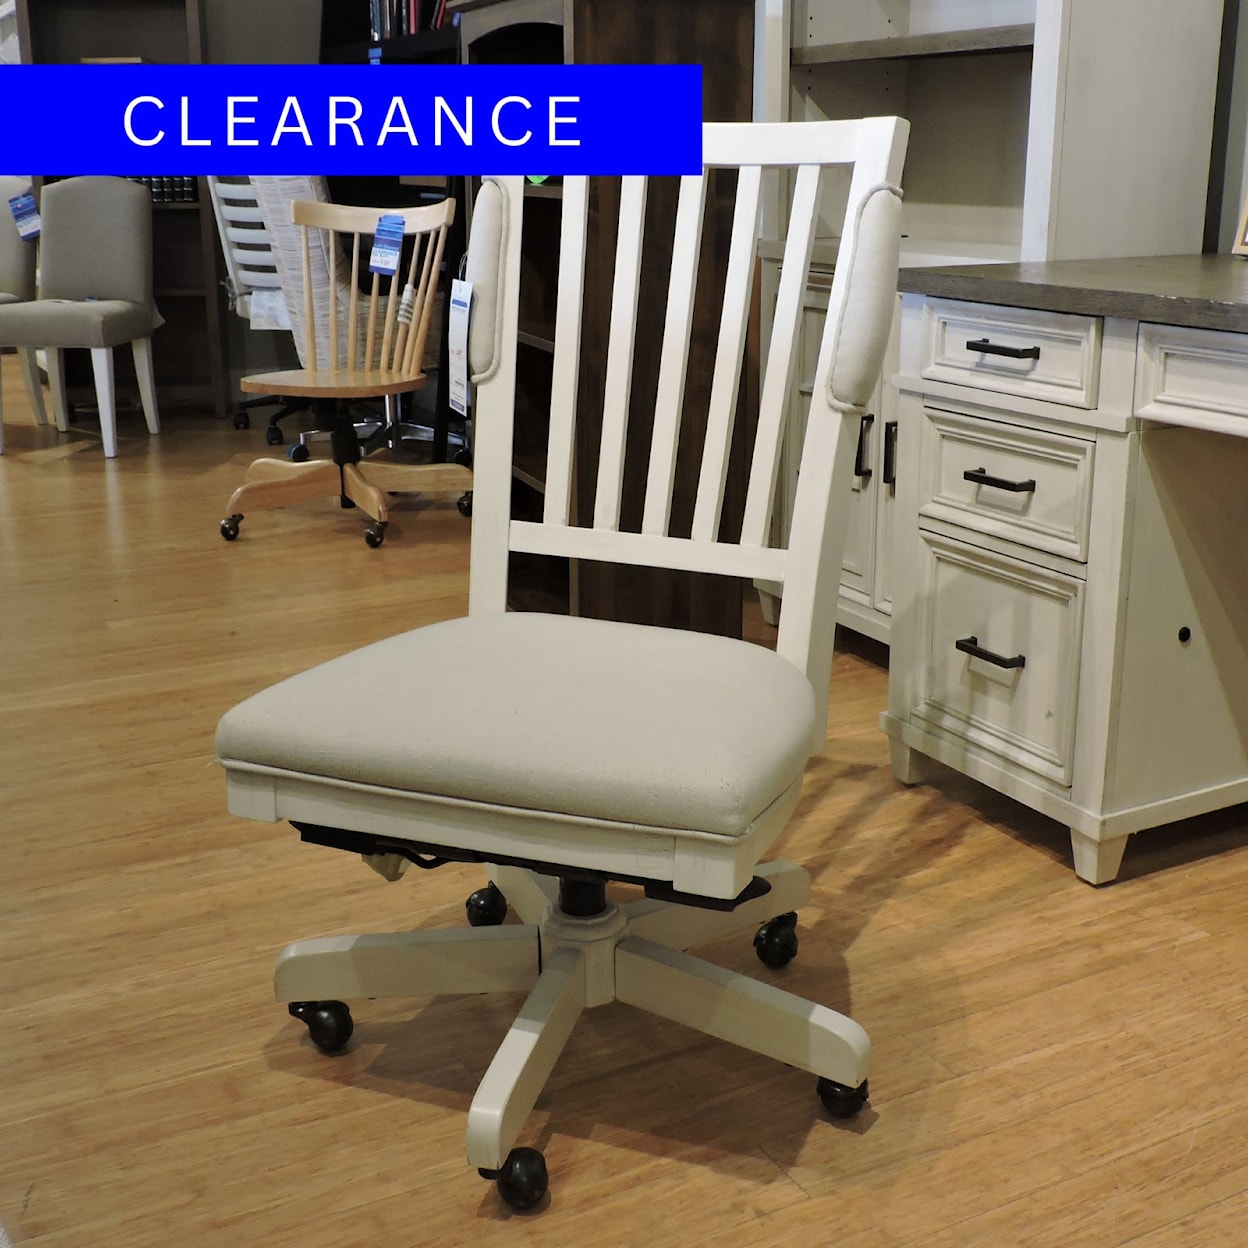 Miscellaneous Clearance Desk Chair